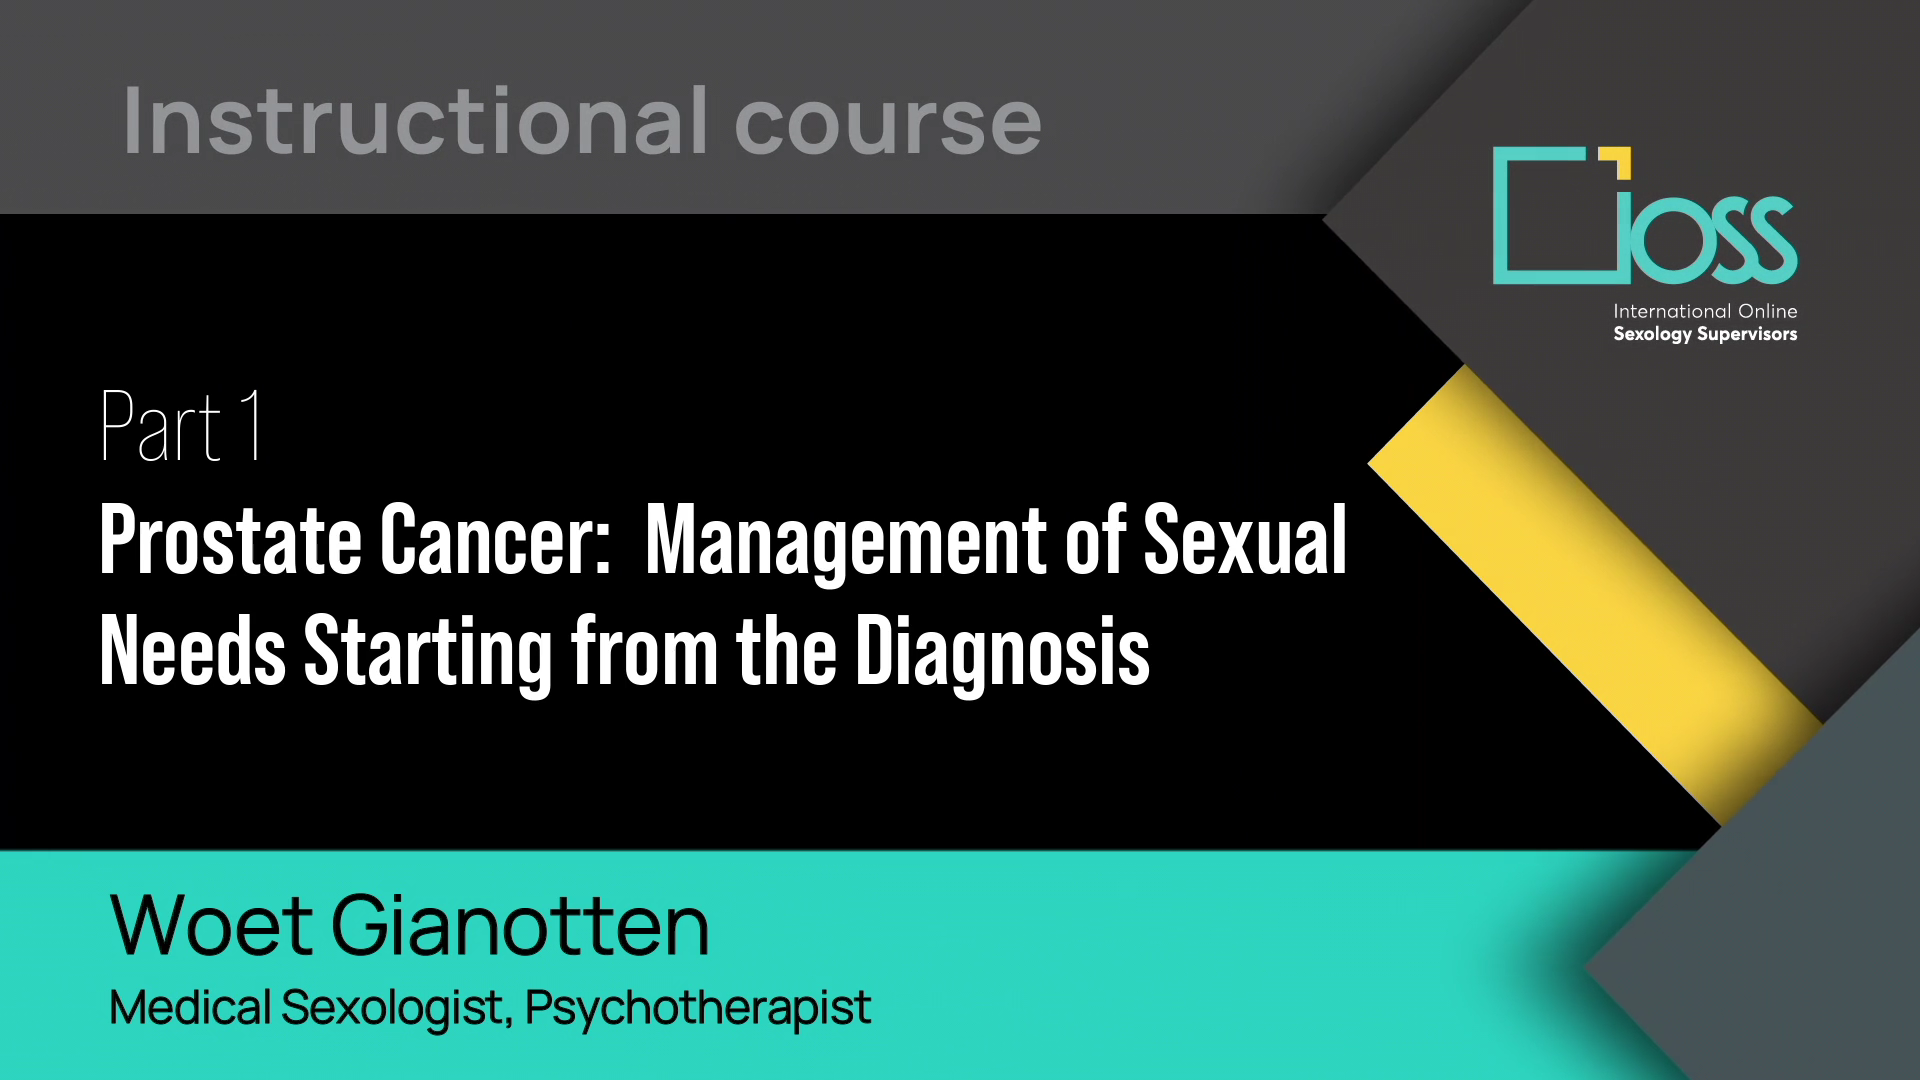 Part 1 Prostate Cancer: Management of Sexual Needs Starting from the Diagnosis (Part 1 & 2)